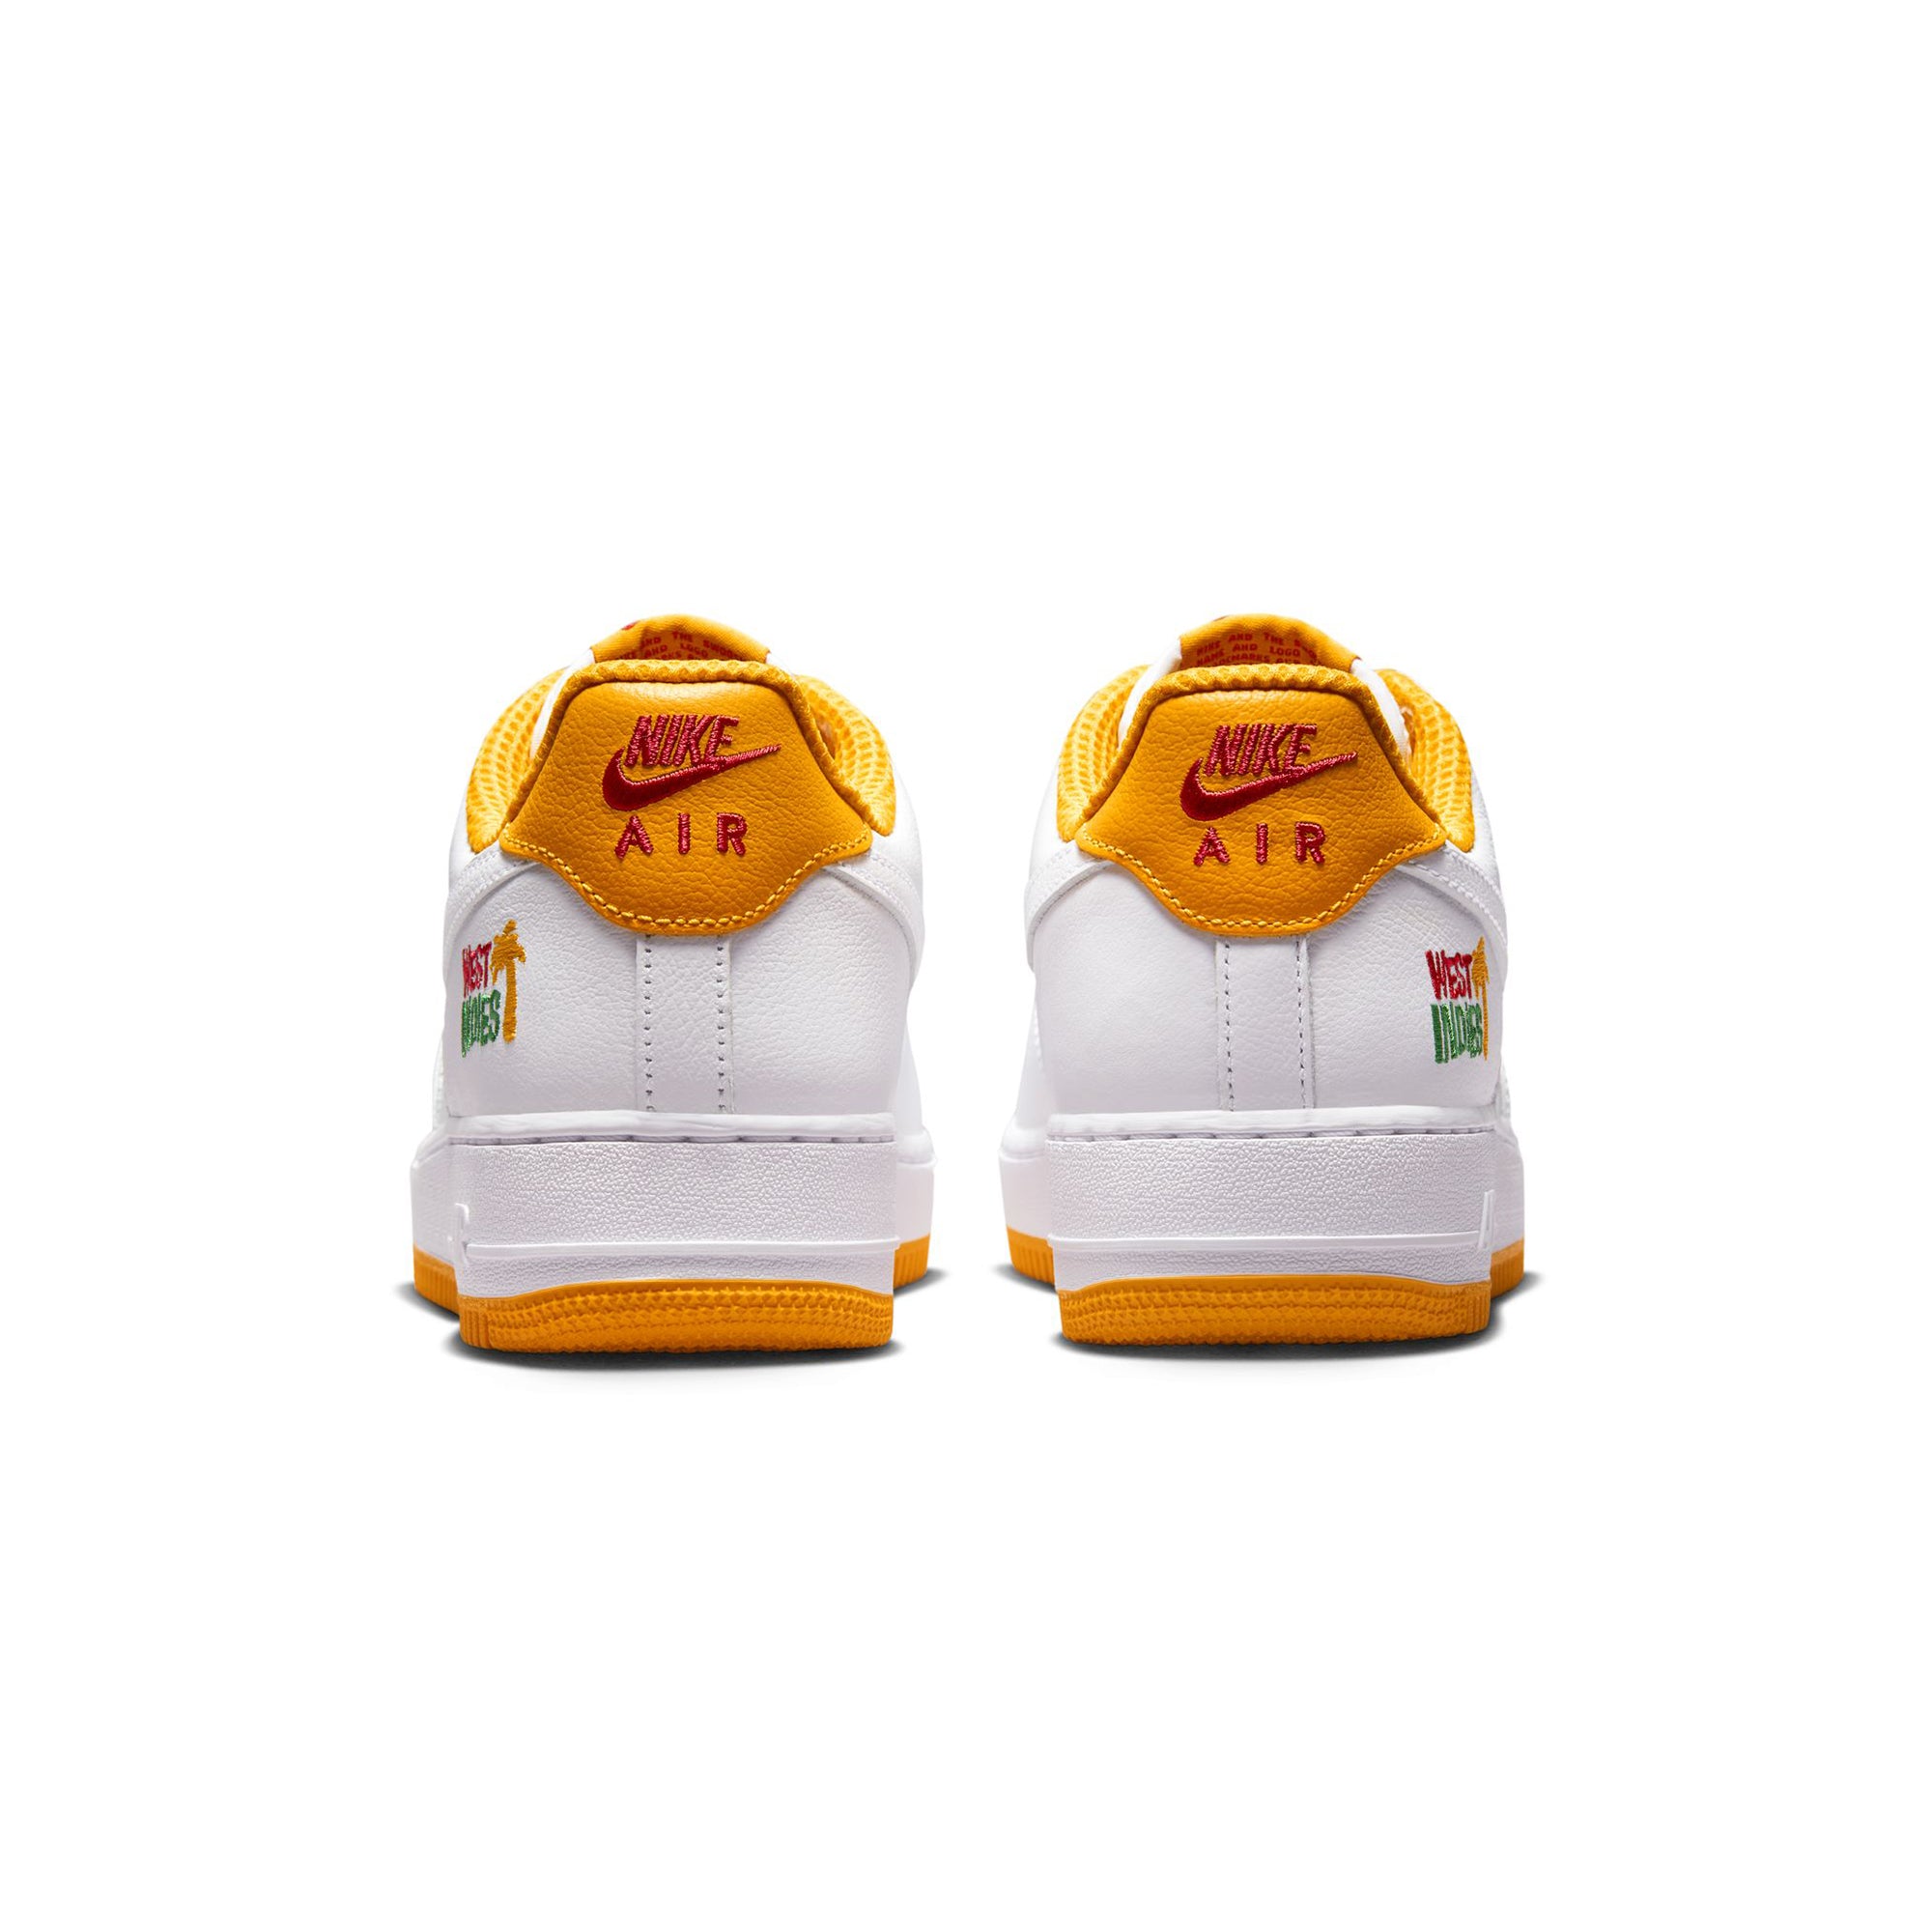 Nike Air Force 1 Low West Indies DX1156-101 Store List